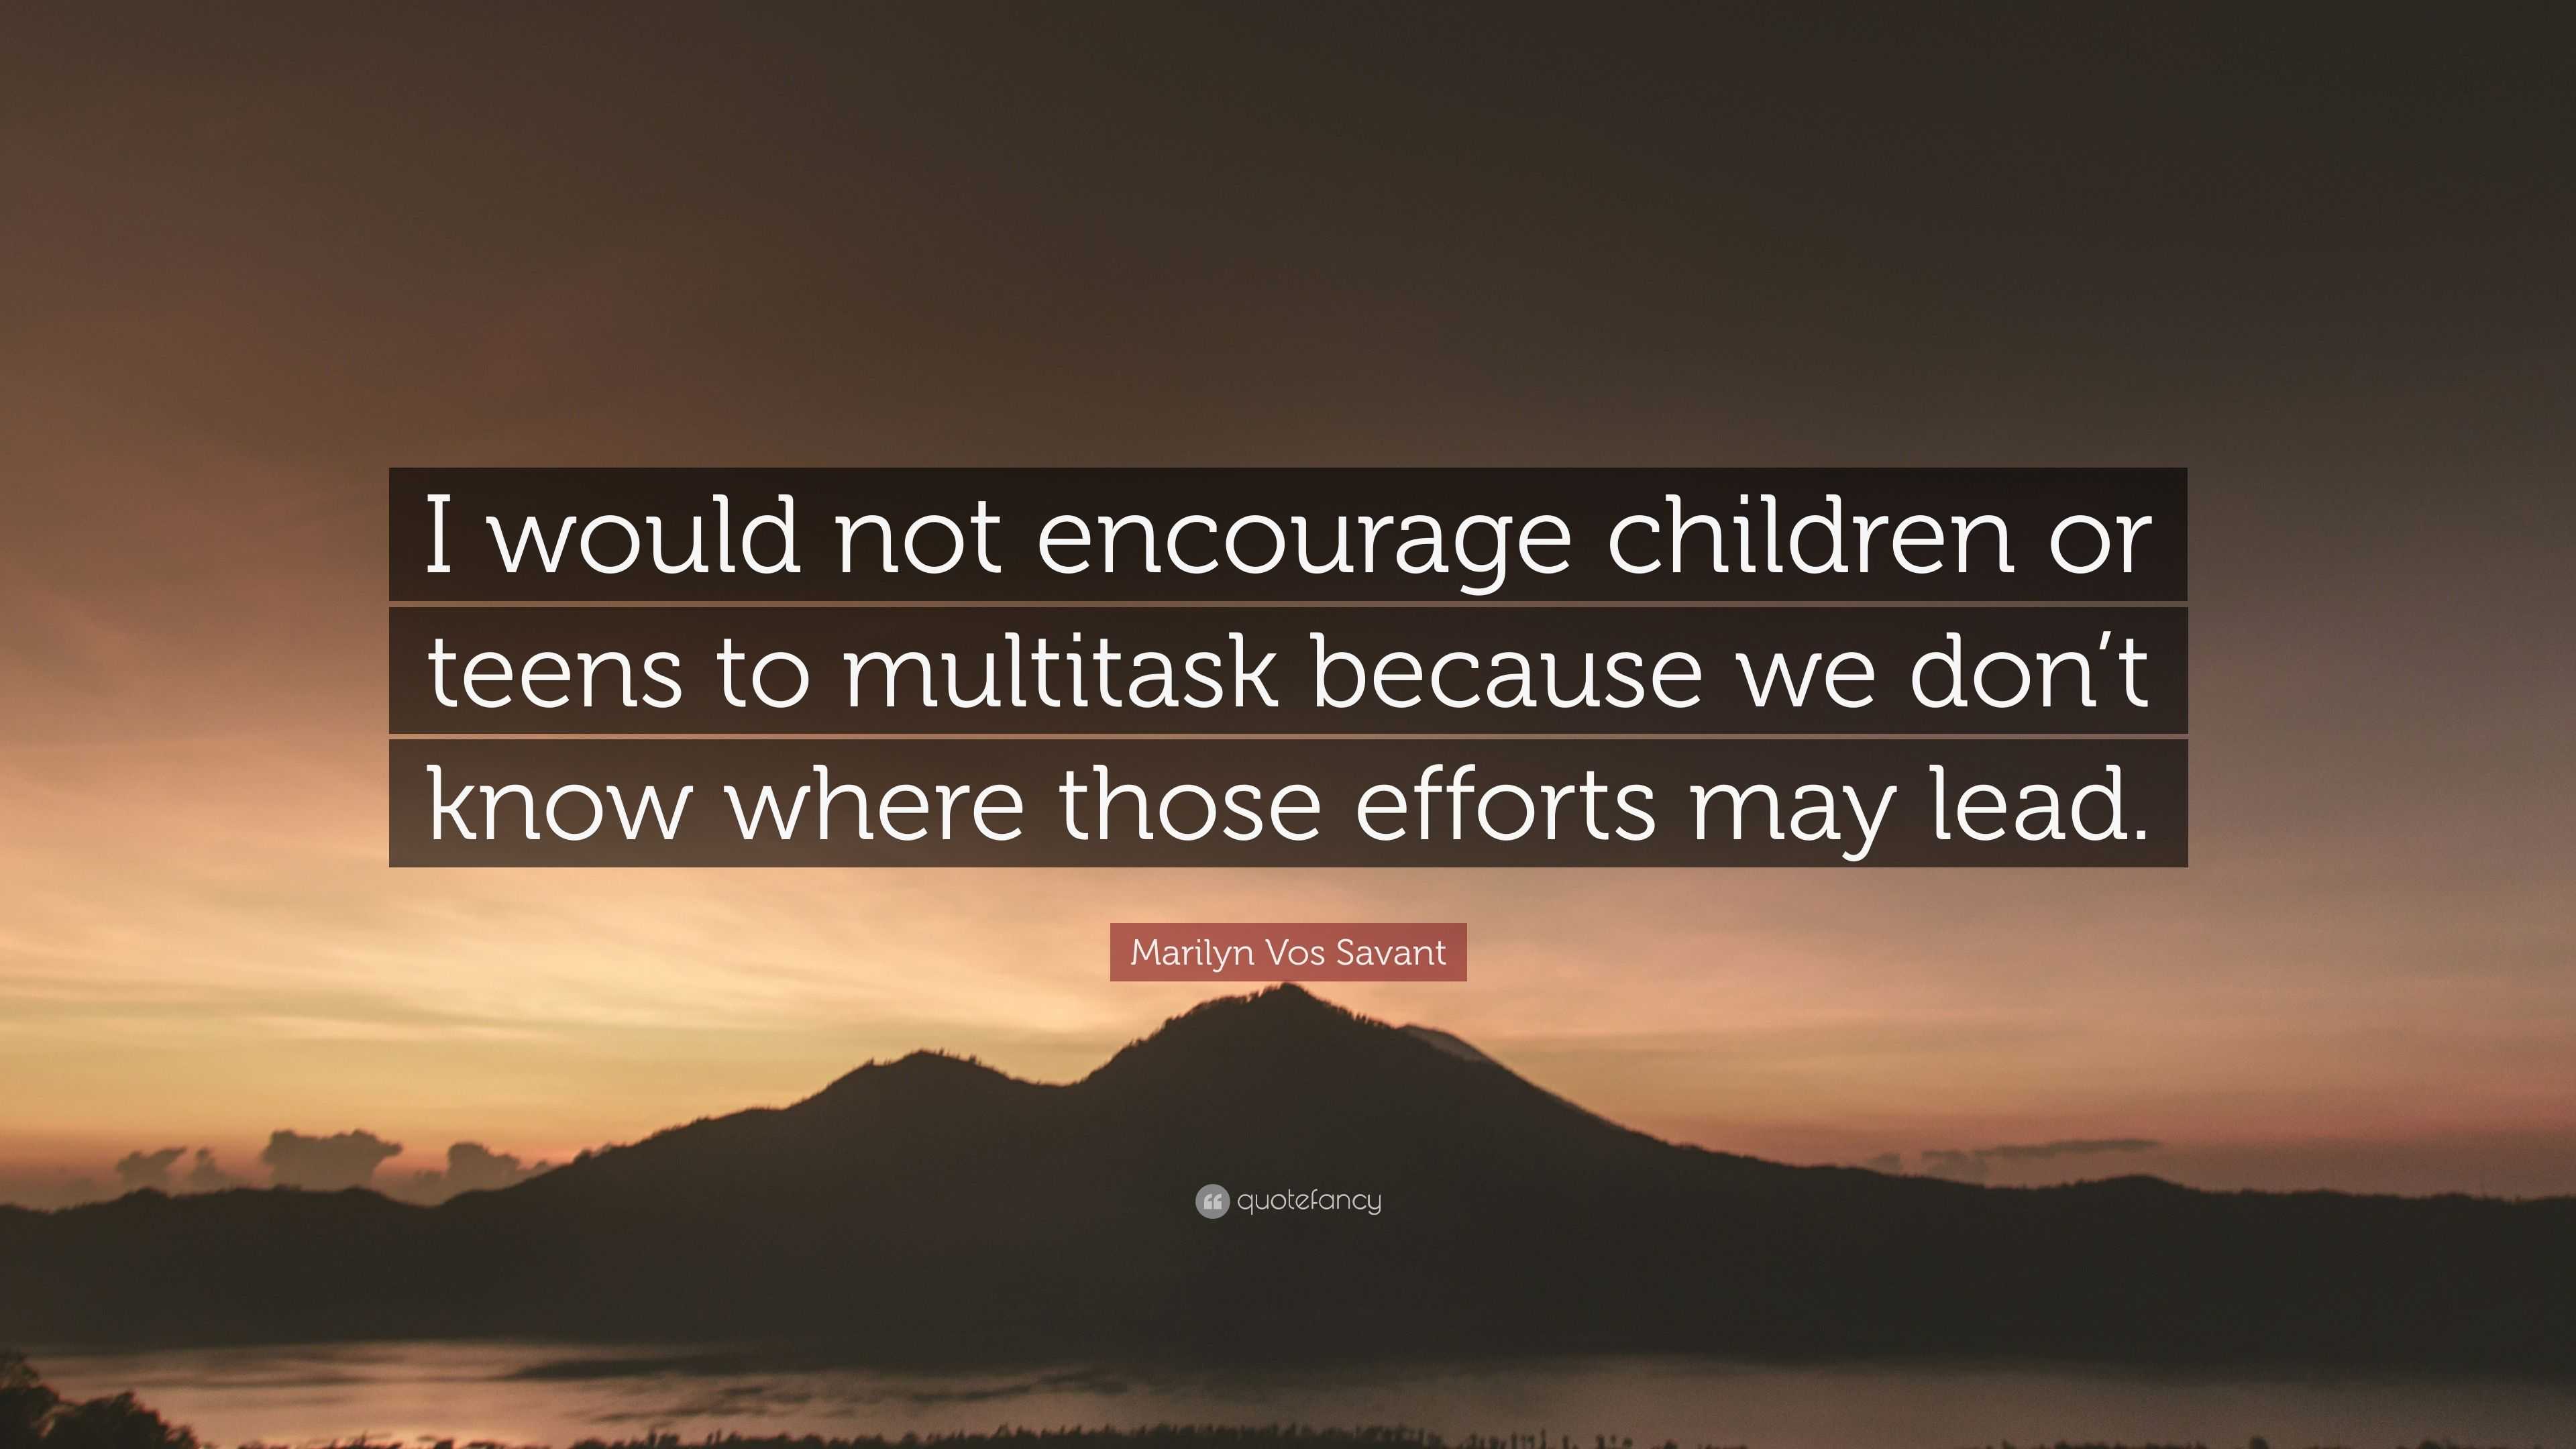 Marilyn Vos Savant Quote: “I would not encourage children or teens